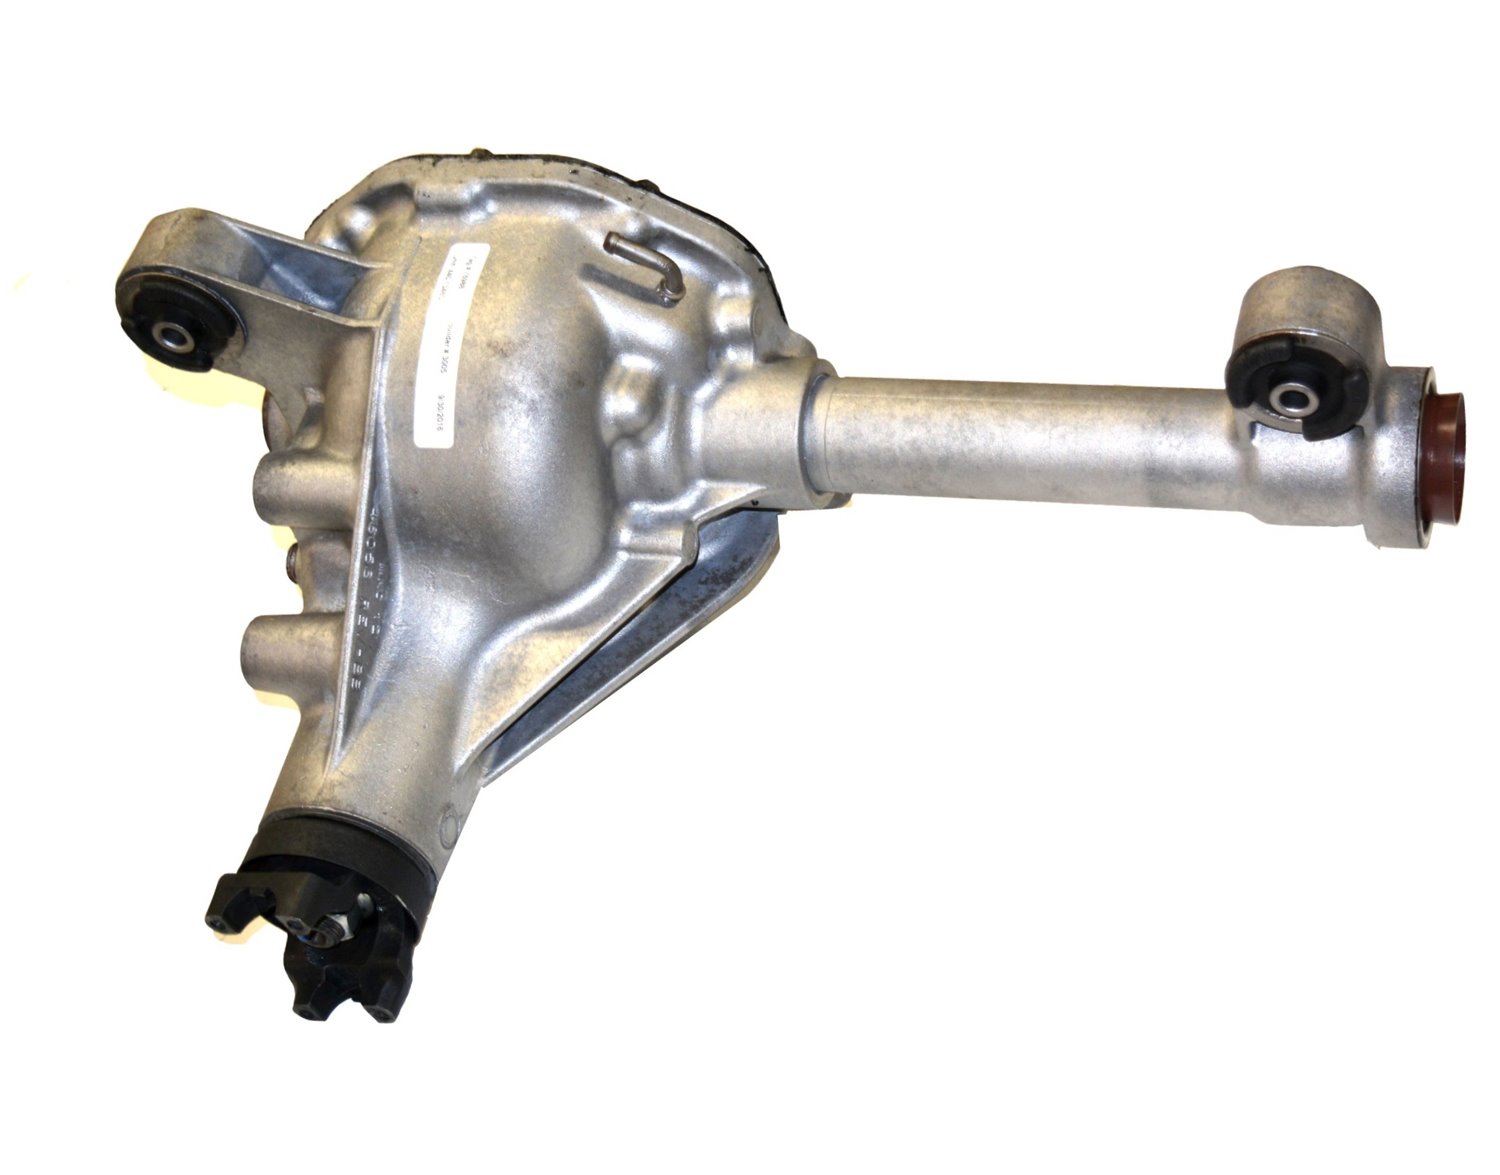 Remanufactured Axle Assembly for Ford M35 IFS 91-94 Ford Explorer 3.27